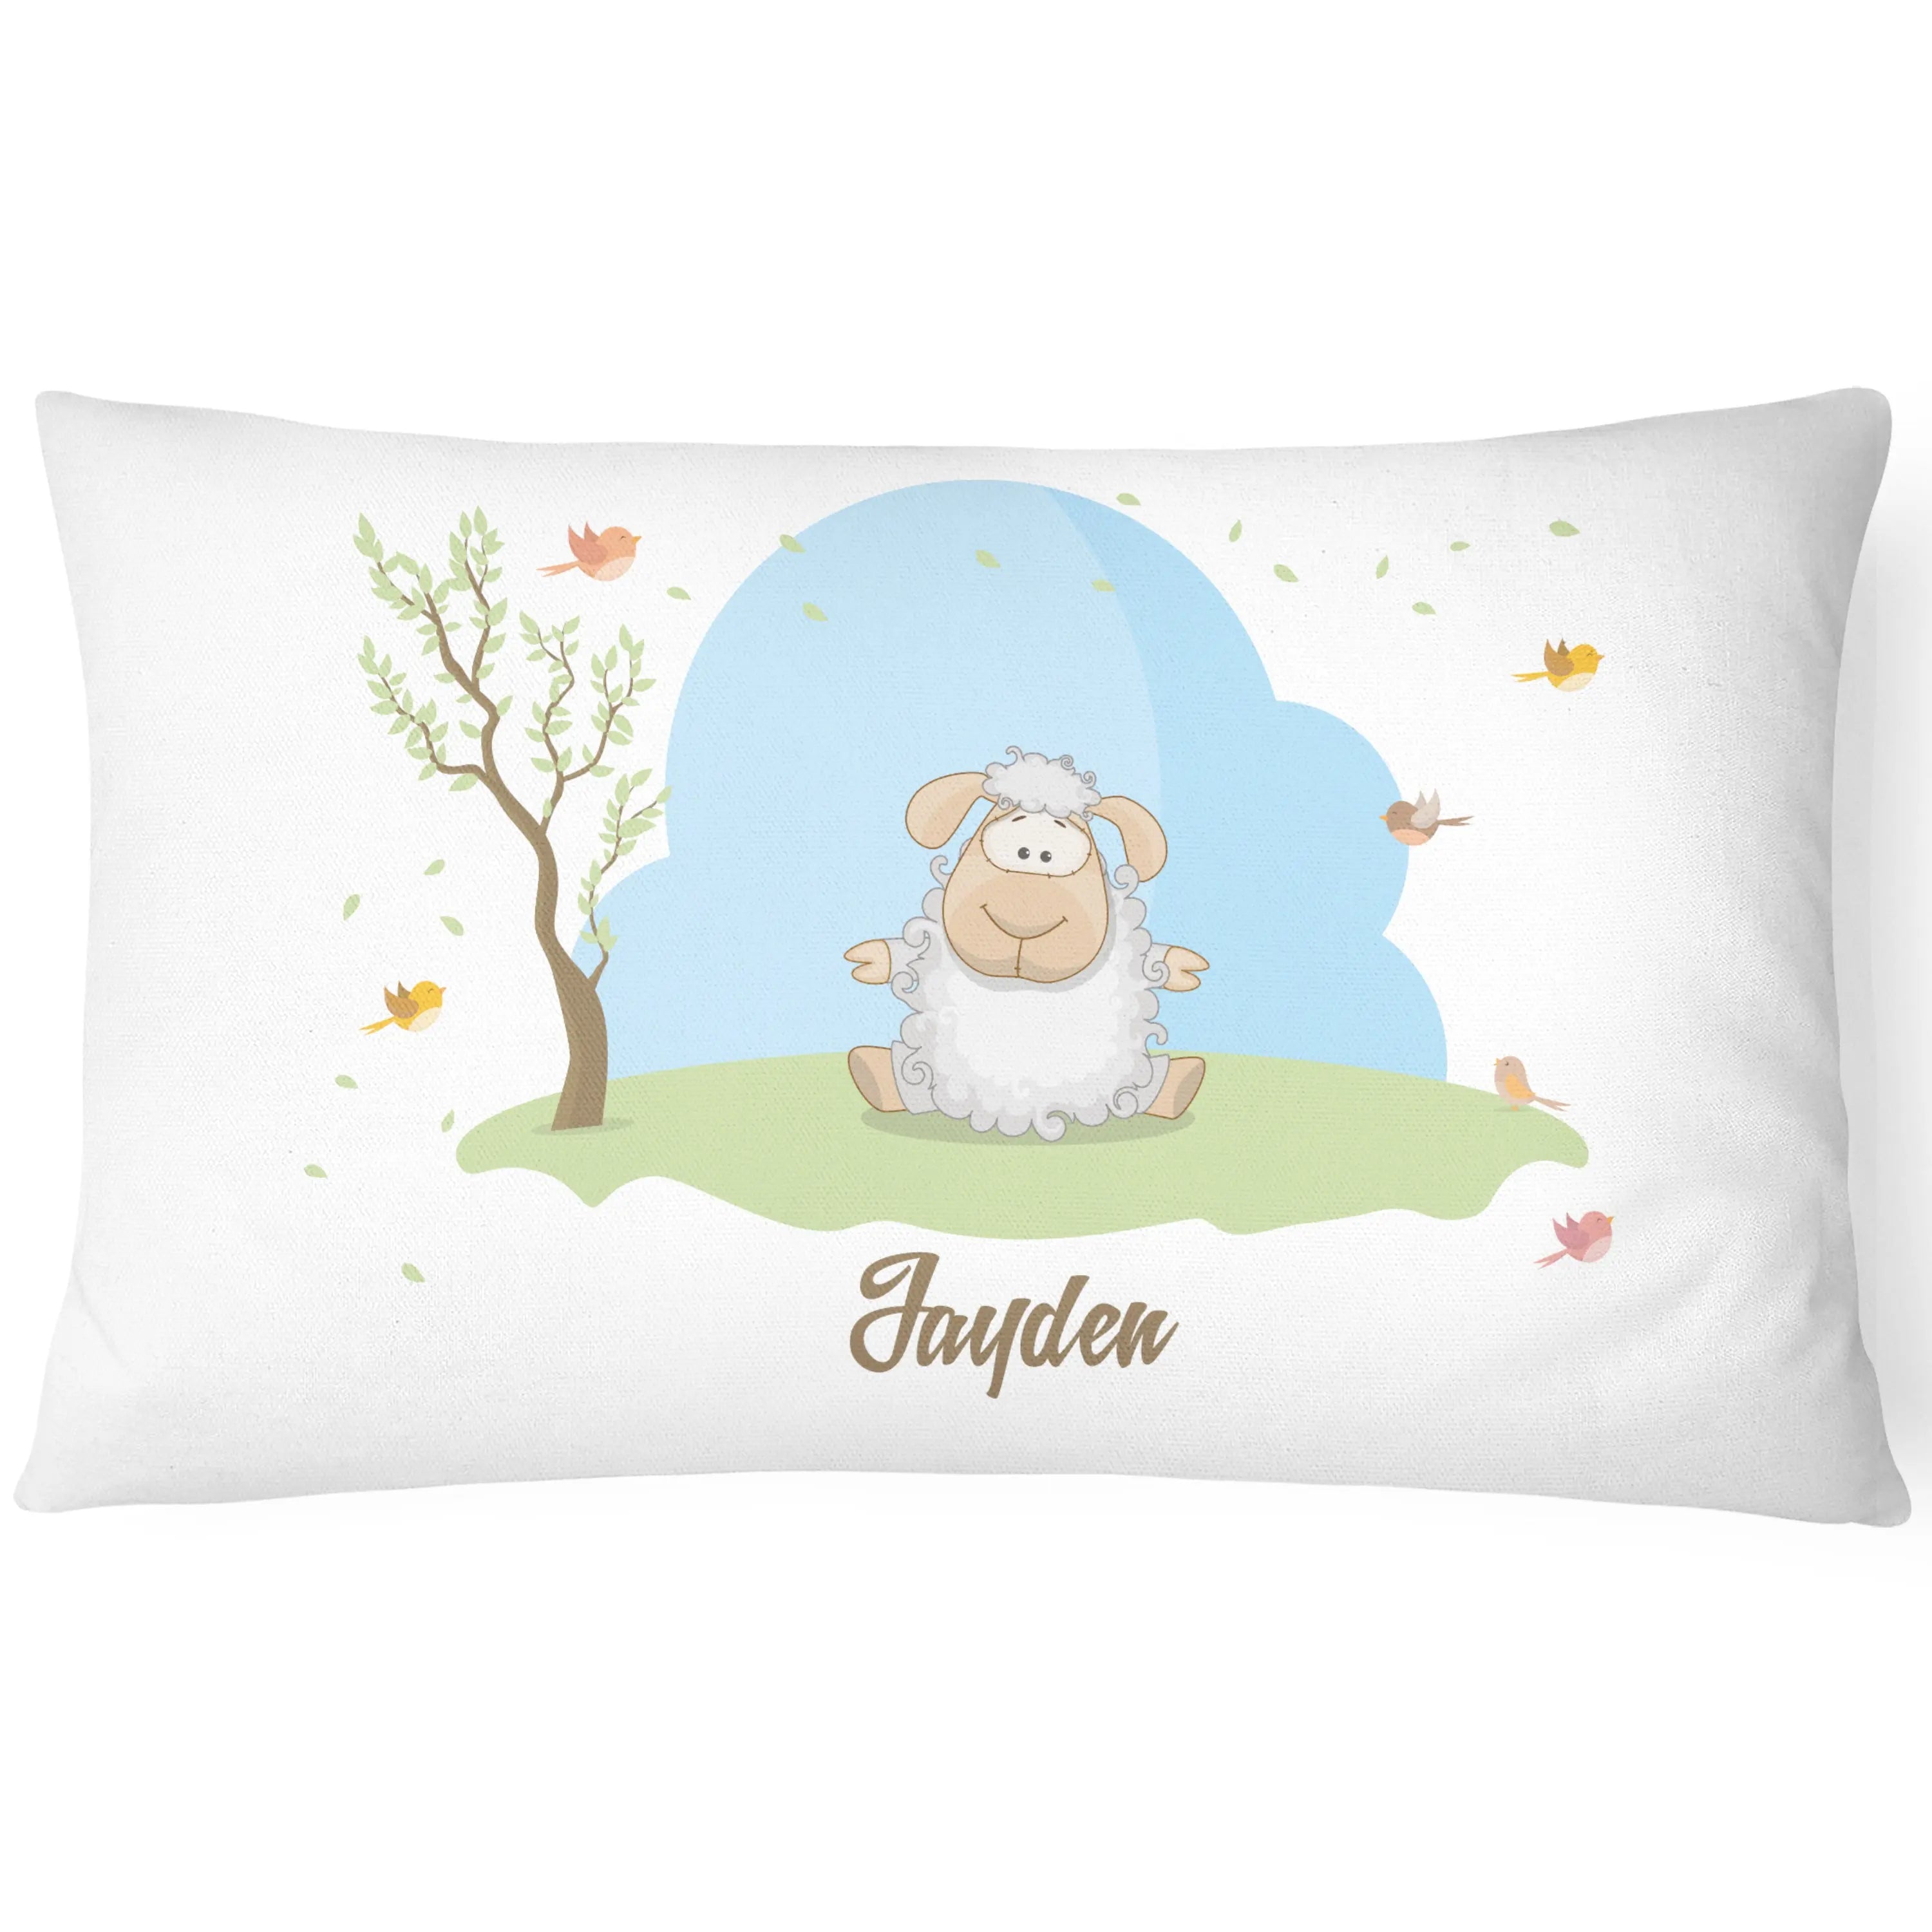 Personalised Children's Pillowcase Cute Animal - Fluffly